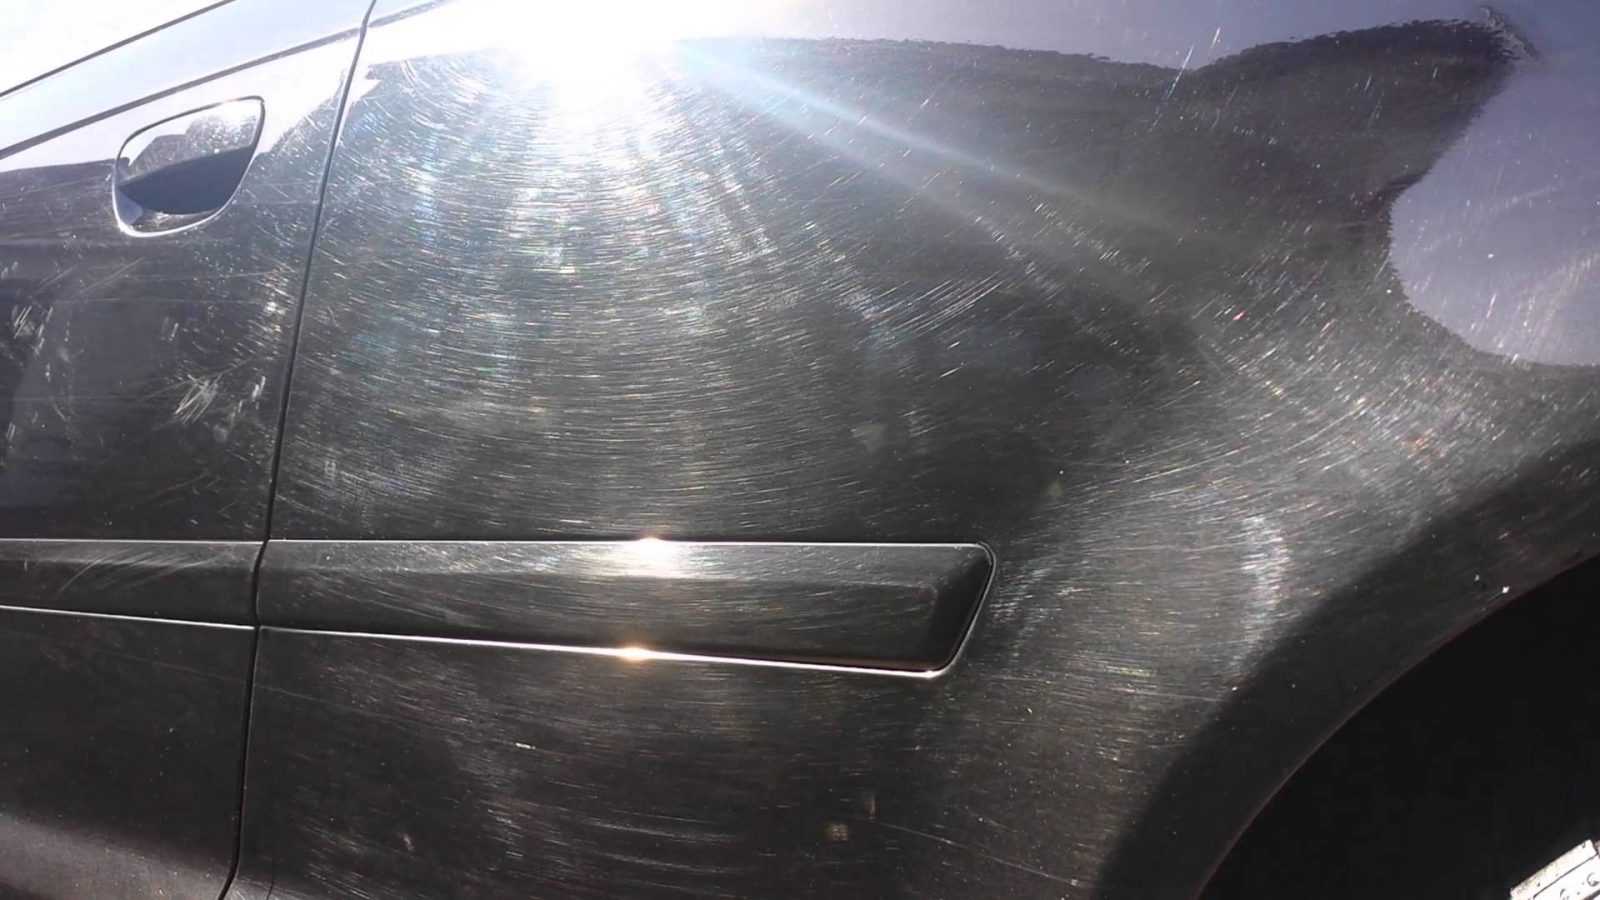 What Causes Swirl Marks On Your Car?